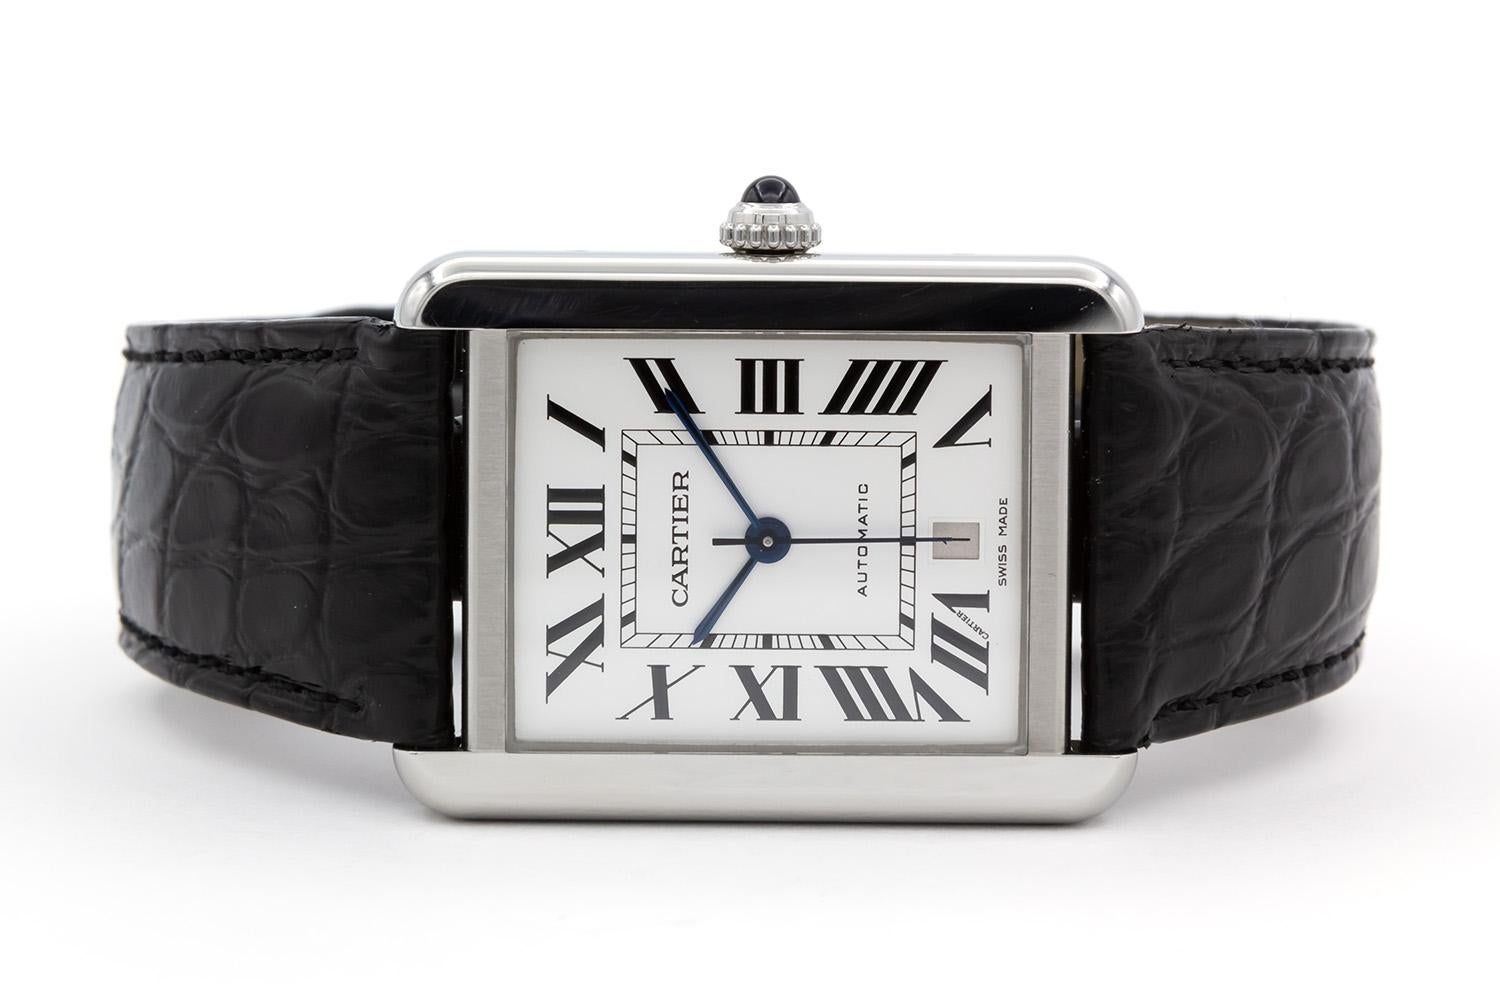 We are pleased to offer this Authentic Cartier Stainless Steel Tank Solo XL Automatic Date W5200027 3515. The Cartier Tank Solo XL watch features an automatic self winding movement; silver opaline dial with black Roman numerals and blued-steel,